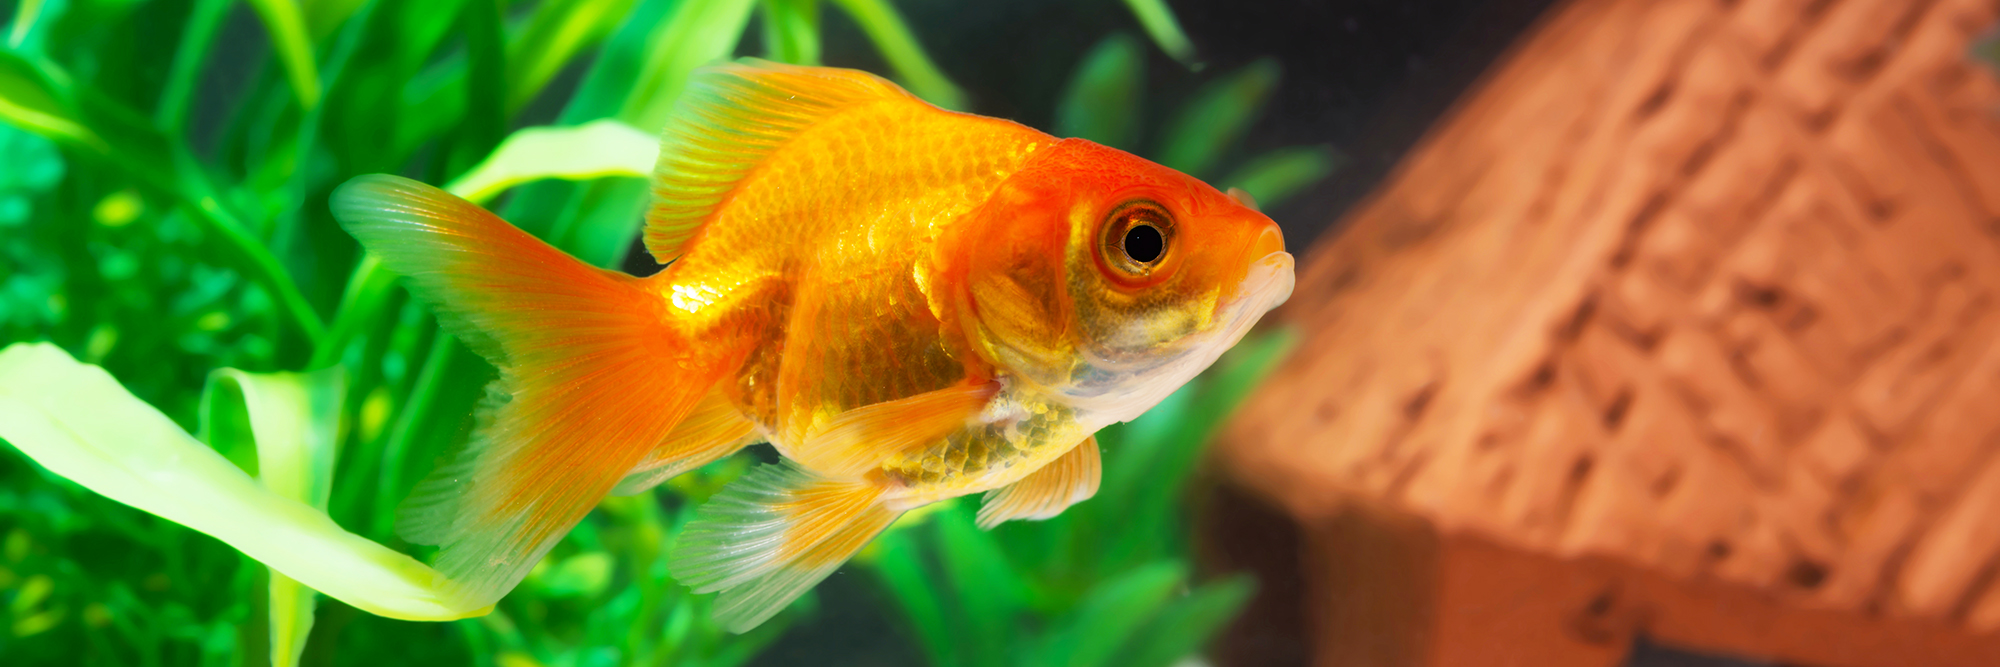 How Big Do Goldfish Get? Potential Size and Growth Rate (2022)